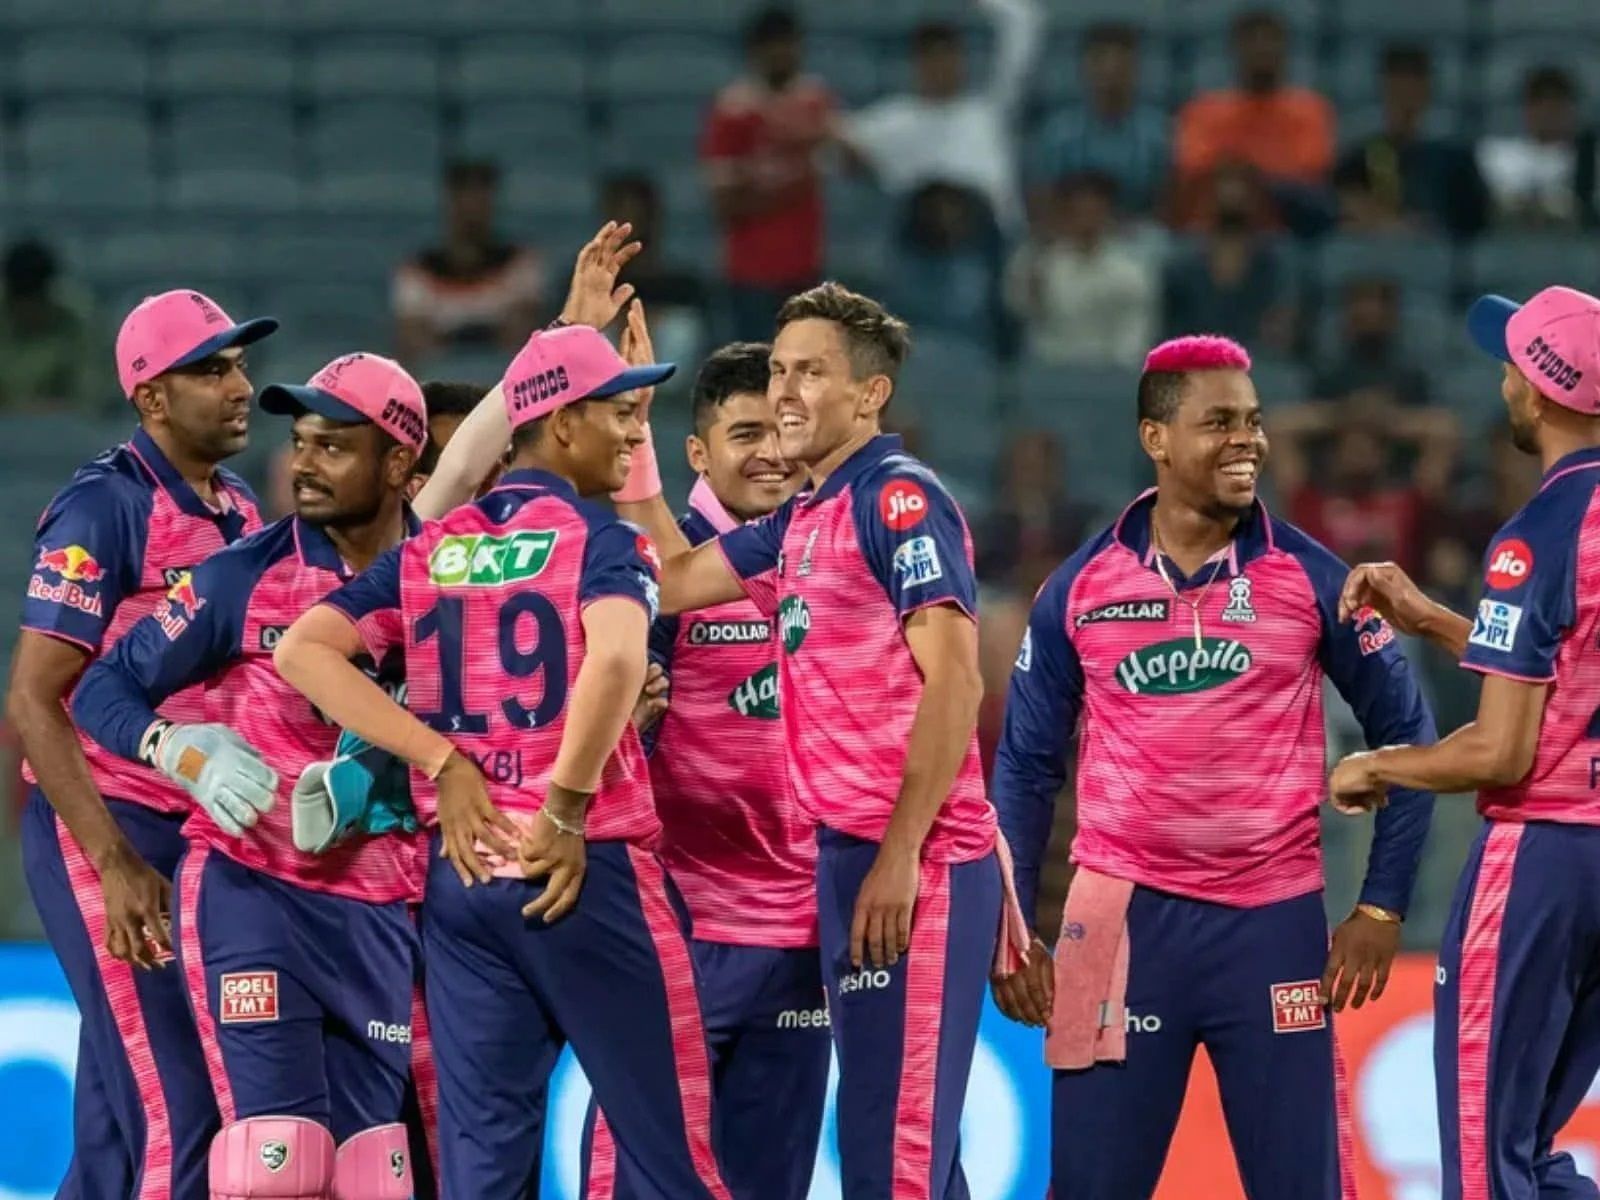 The Rajasthan Royals finished as the runners-up in IPL 2022. [P/C: iplt20.com]